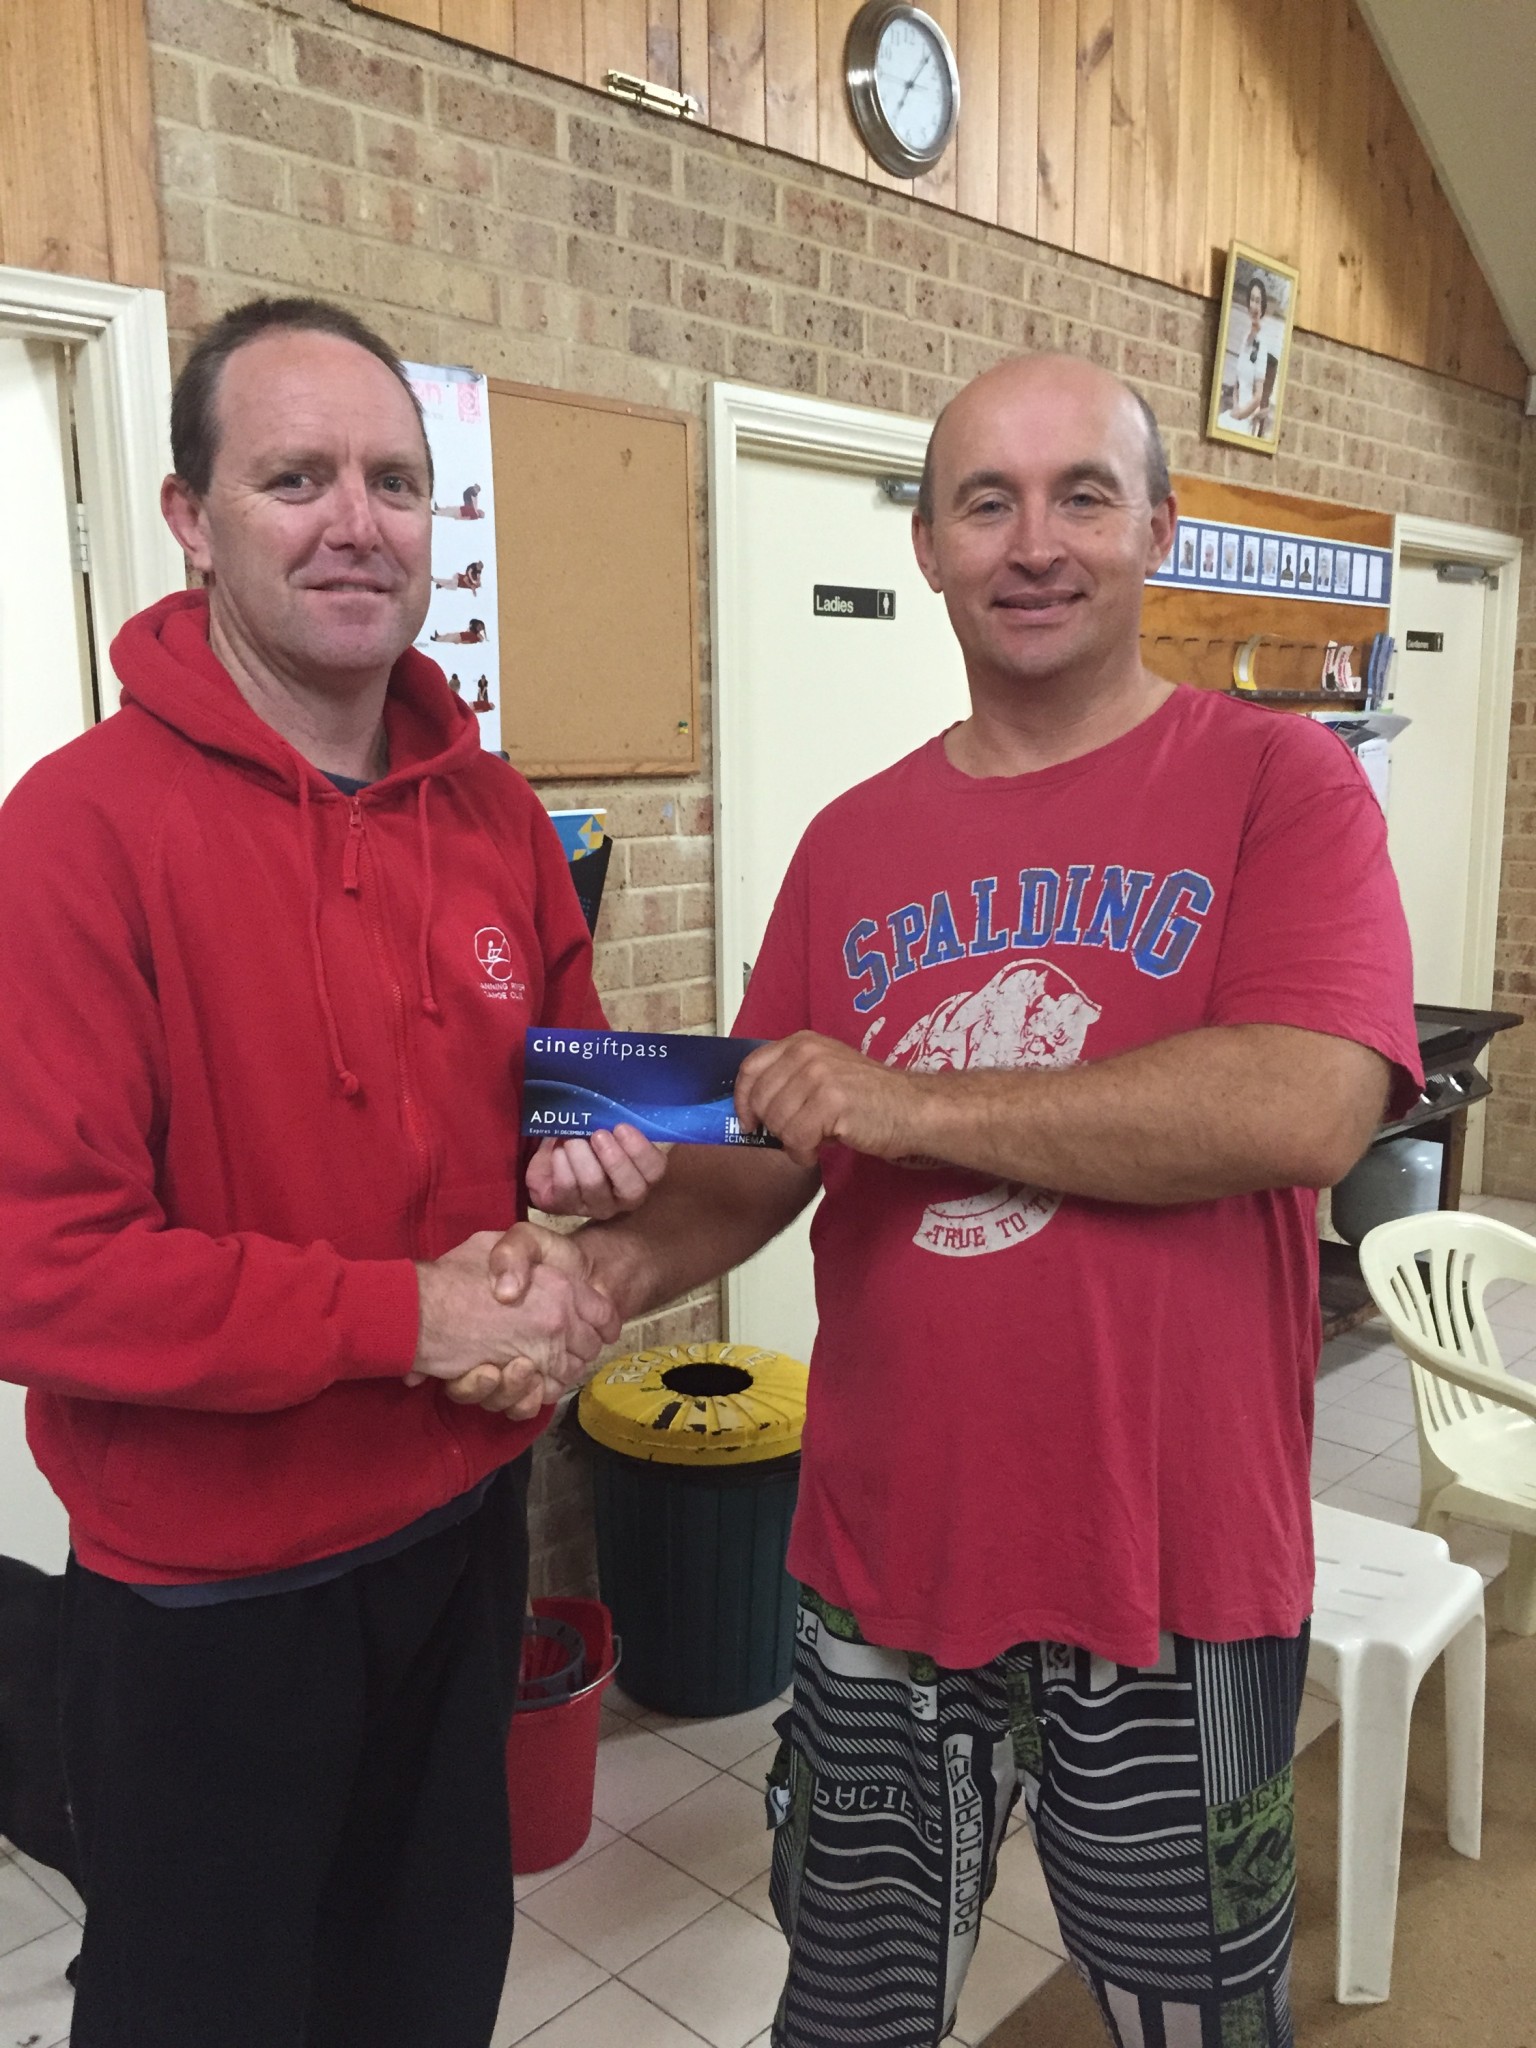 Tues 26th April 2016 : Simon O'Sullivan presenting tonights winner Mike Galanty with a movie voucher